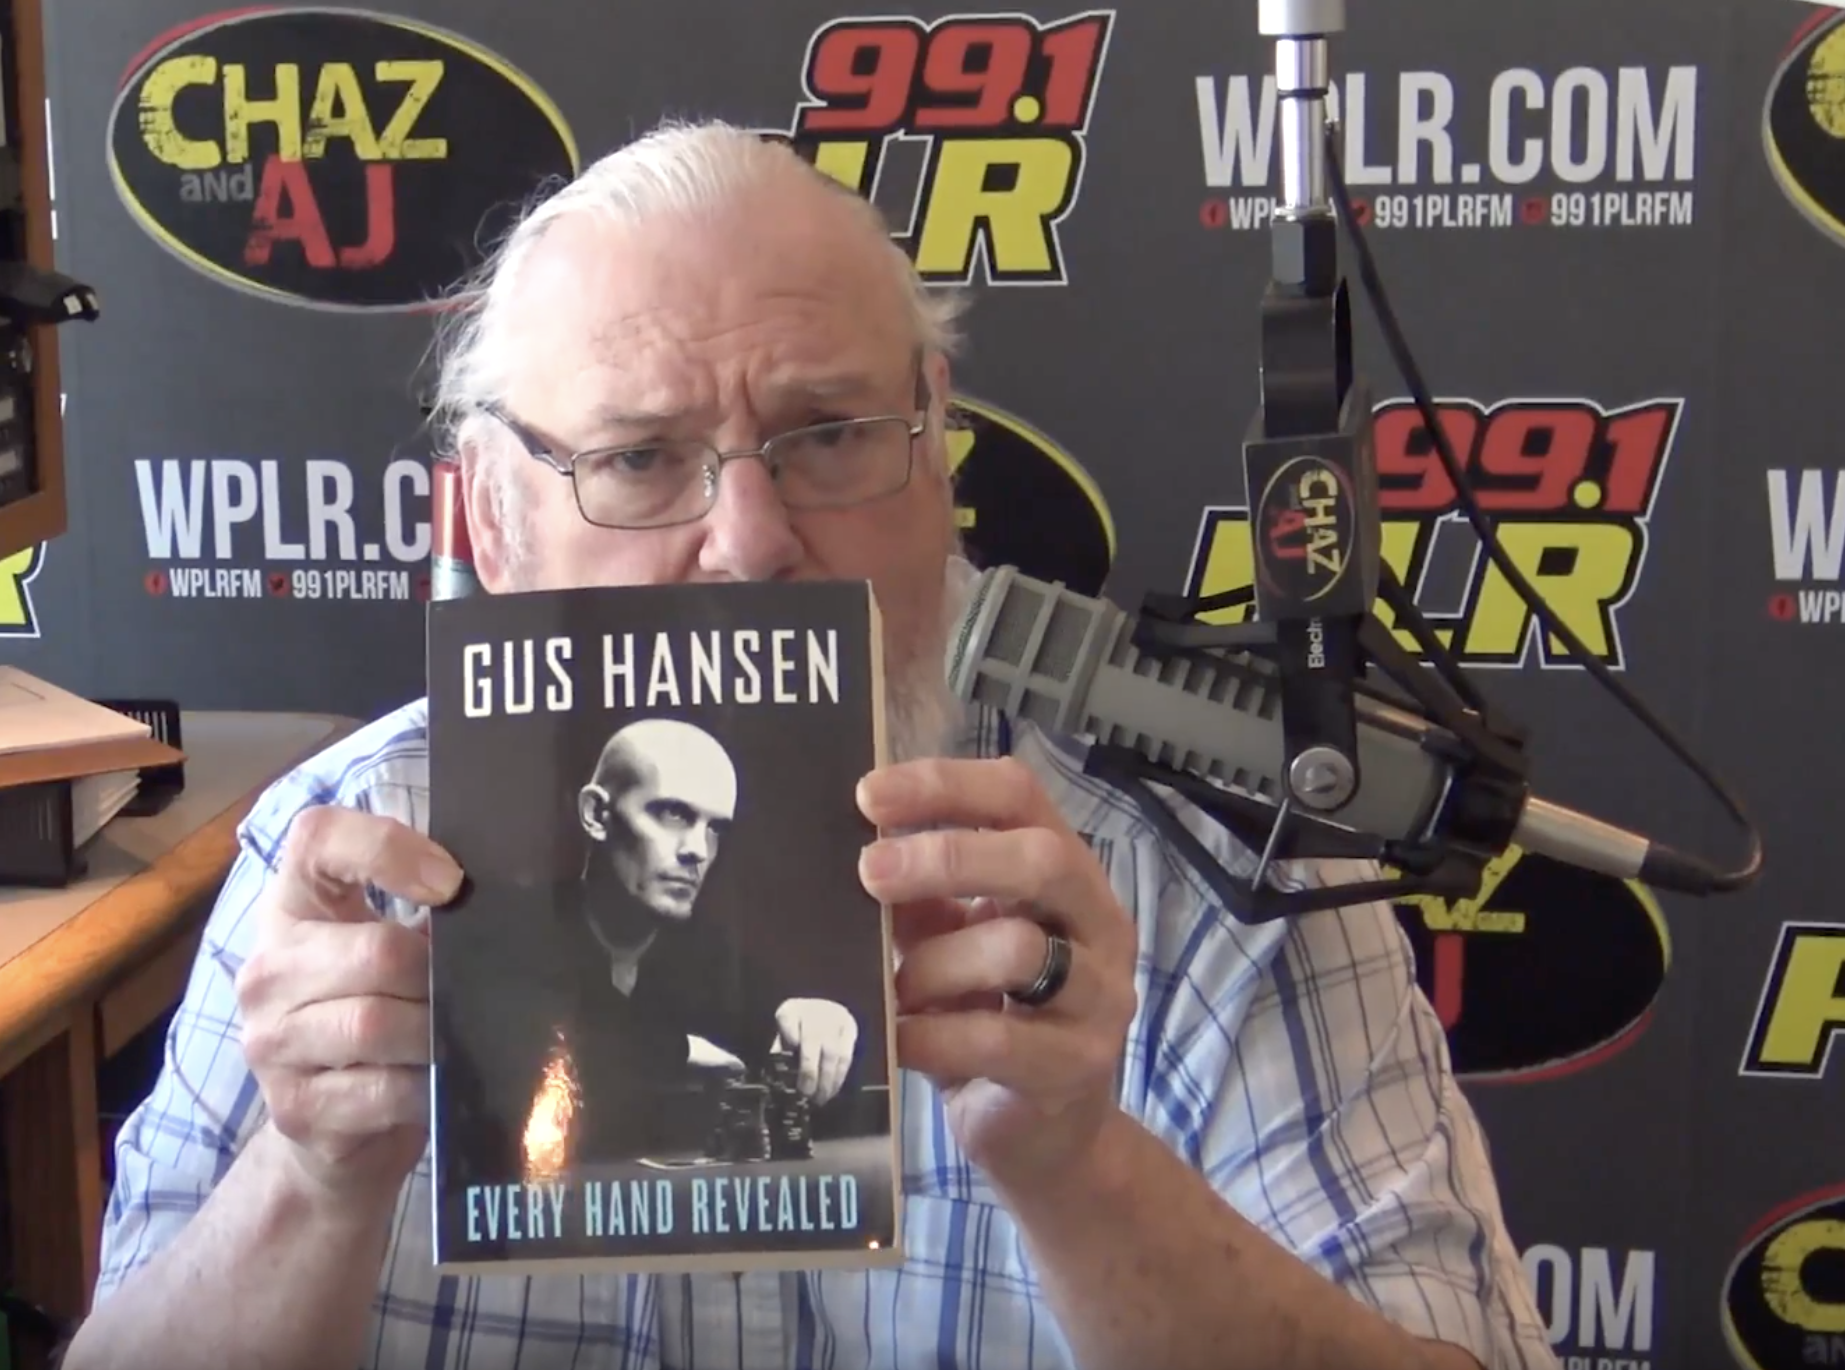 Wiggy’s Book Review: Gus Hansen’s “Every Hand Revealed”